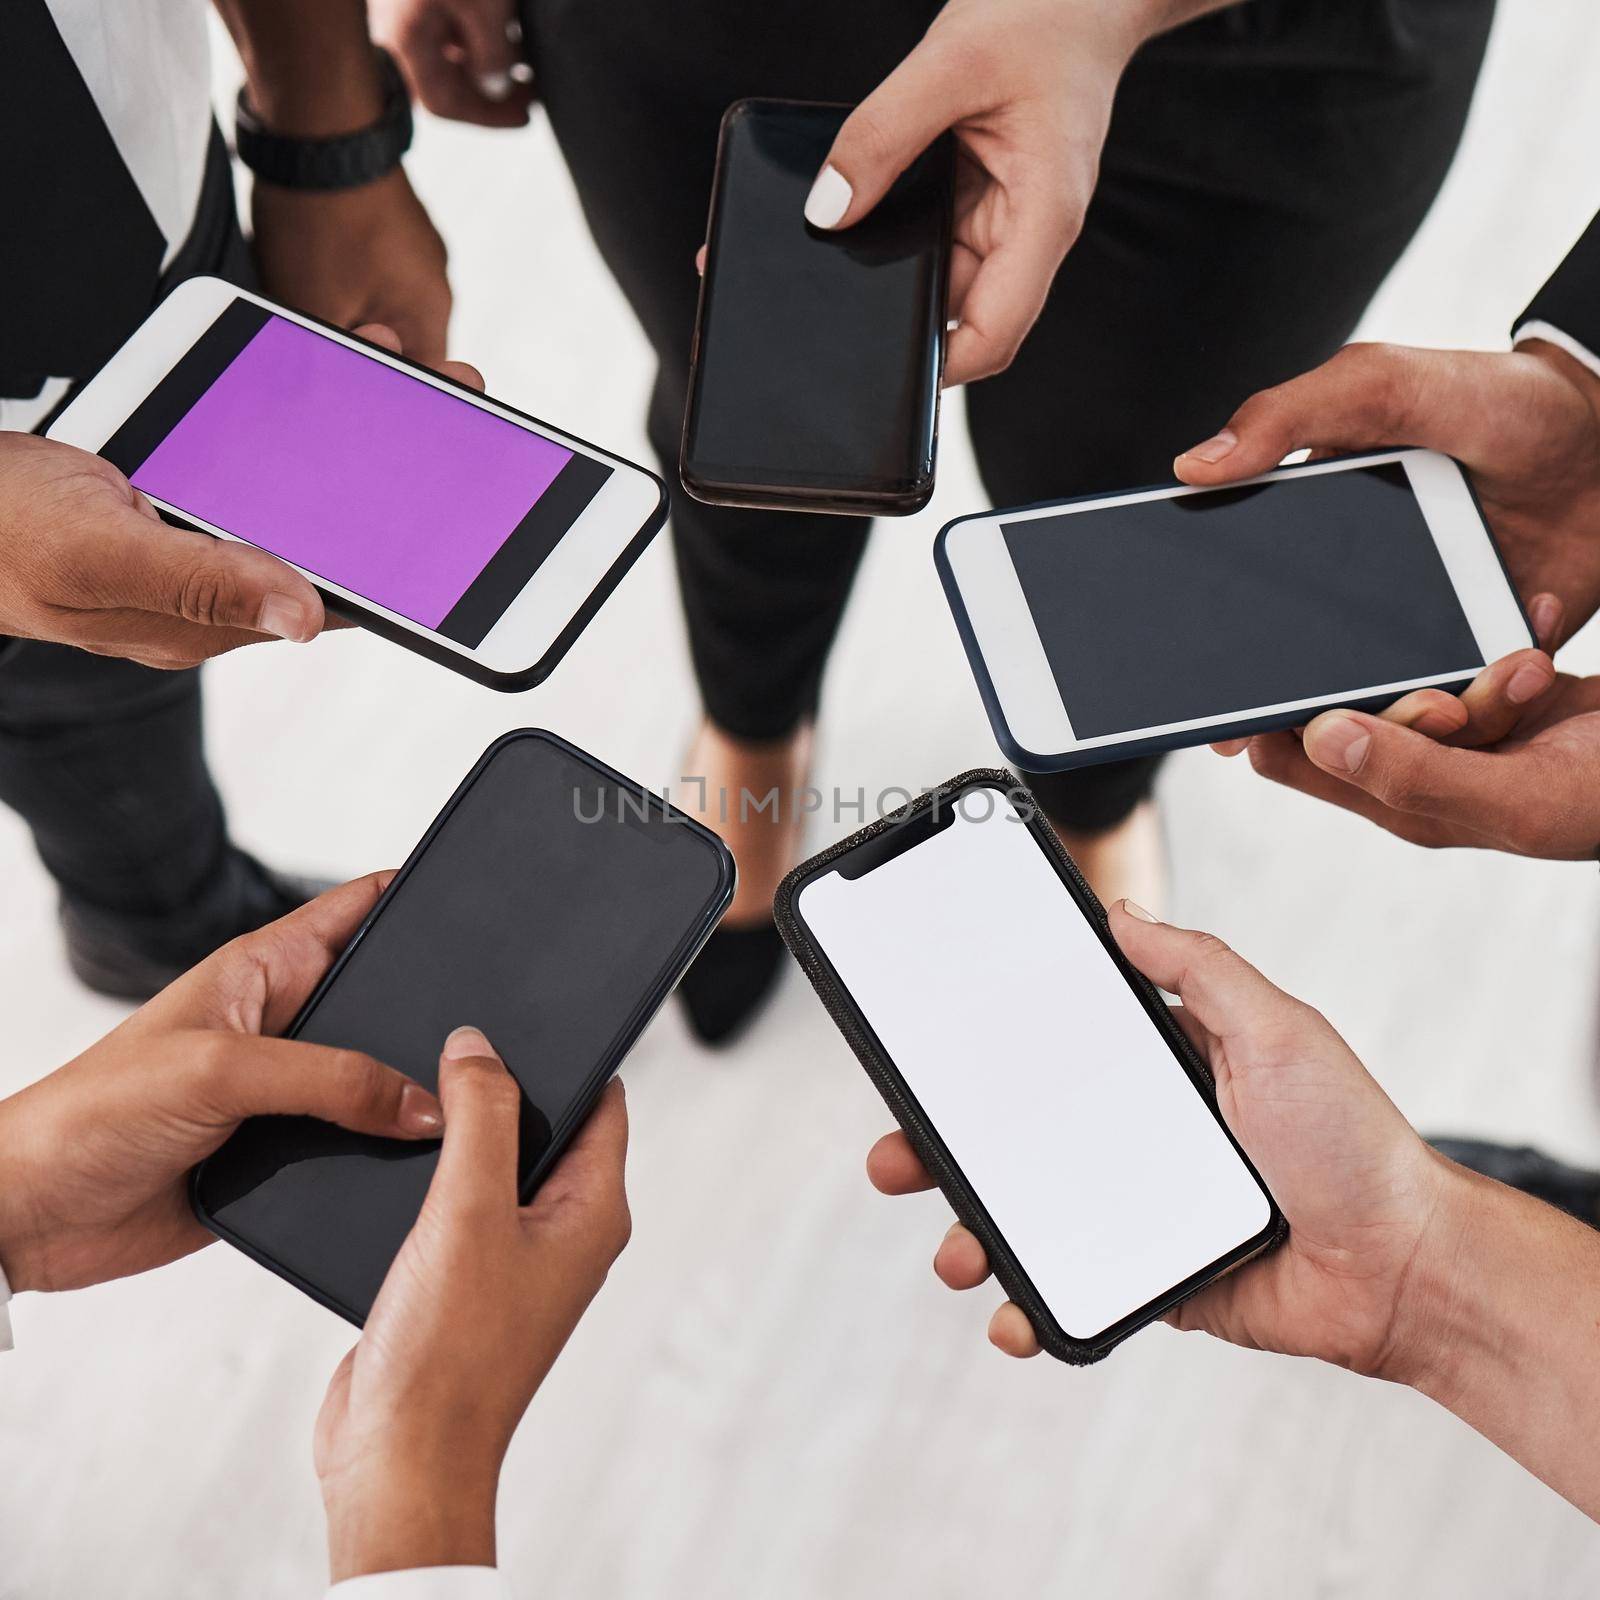 Store and share all the info you need. Closeup shot of a group of unrecognisable businesspeople using cellphones together in an office